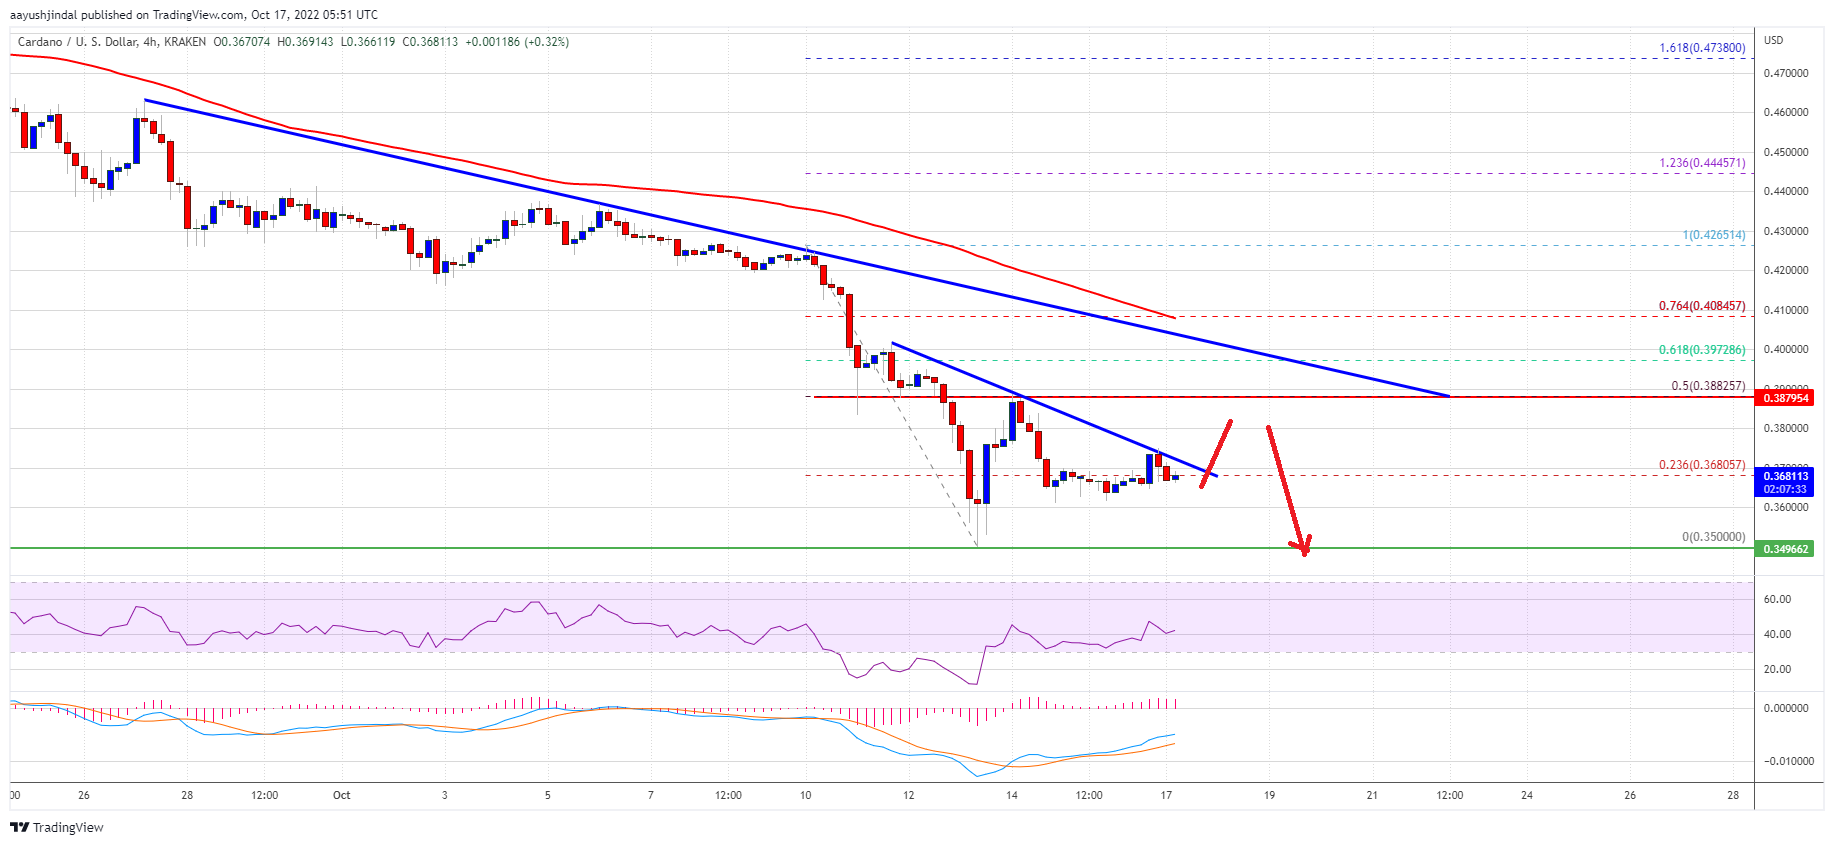 Cardano (ADA) Price Prediction: More Pain Yet To Come